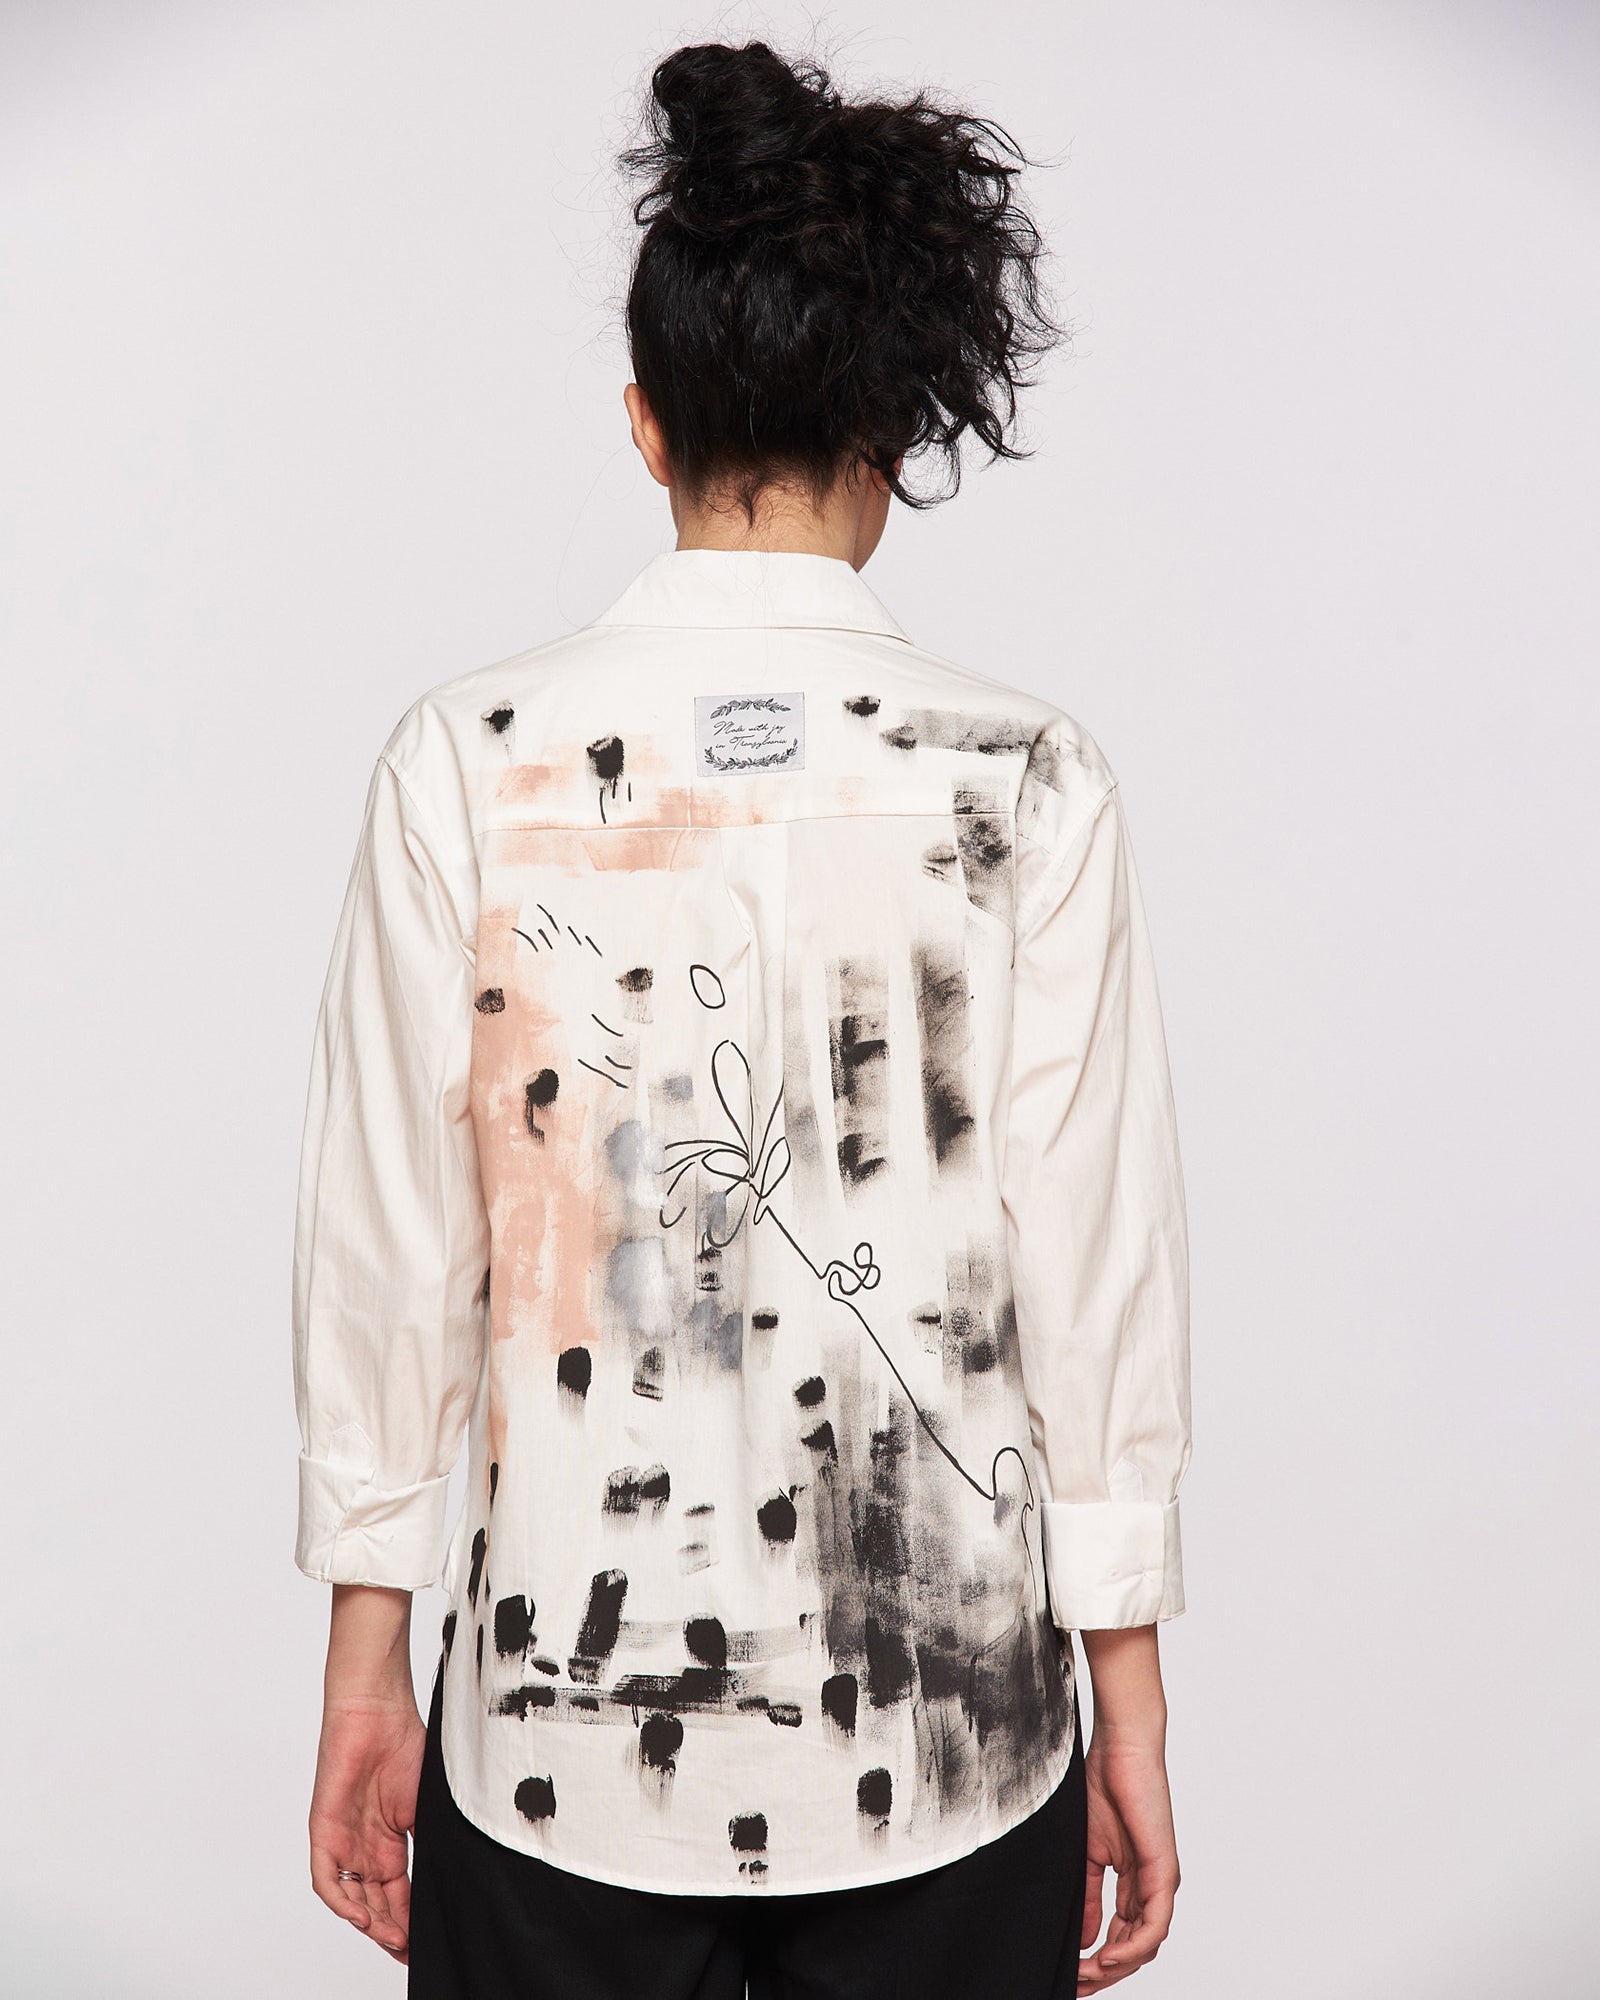 Hand-painted women's shirt "The touch of nature"